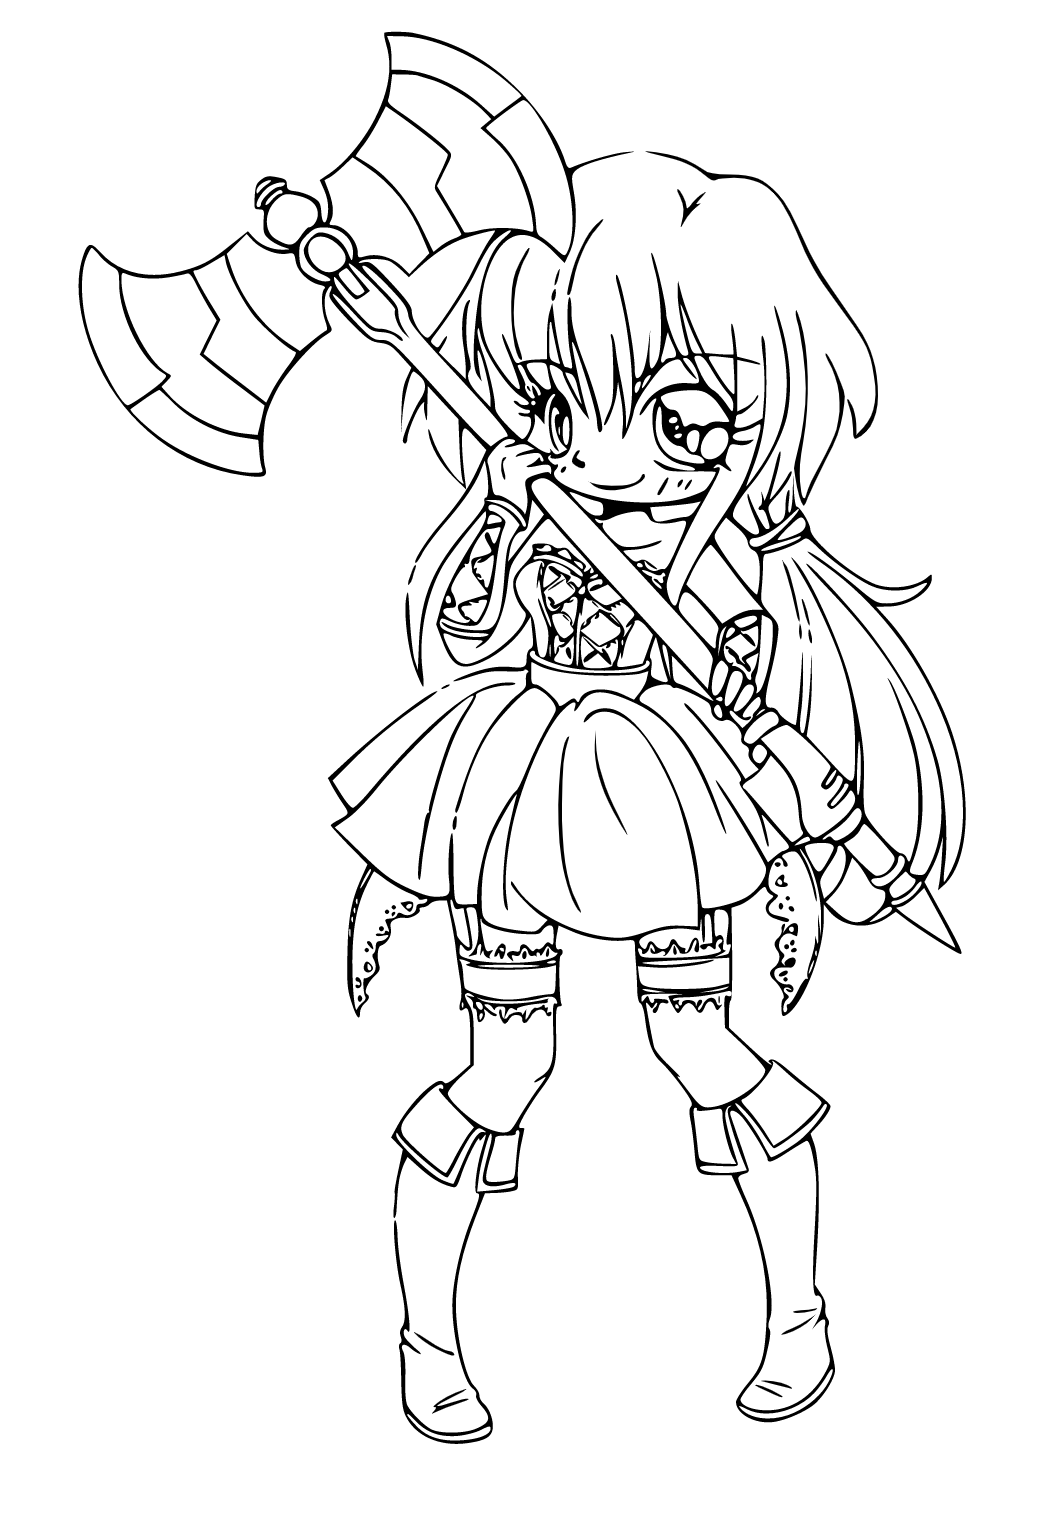 Chibi Anime Girl Coloring Pages Download  Cartoon Network Noods  Free  Transparent PNG Clipart Images Download